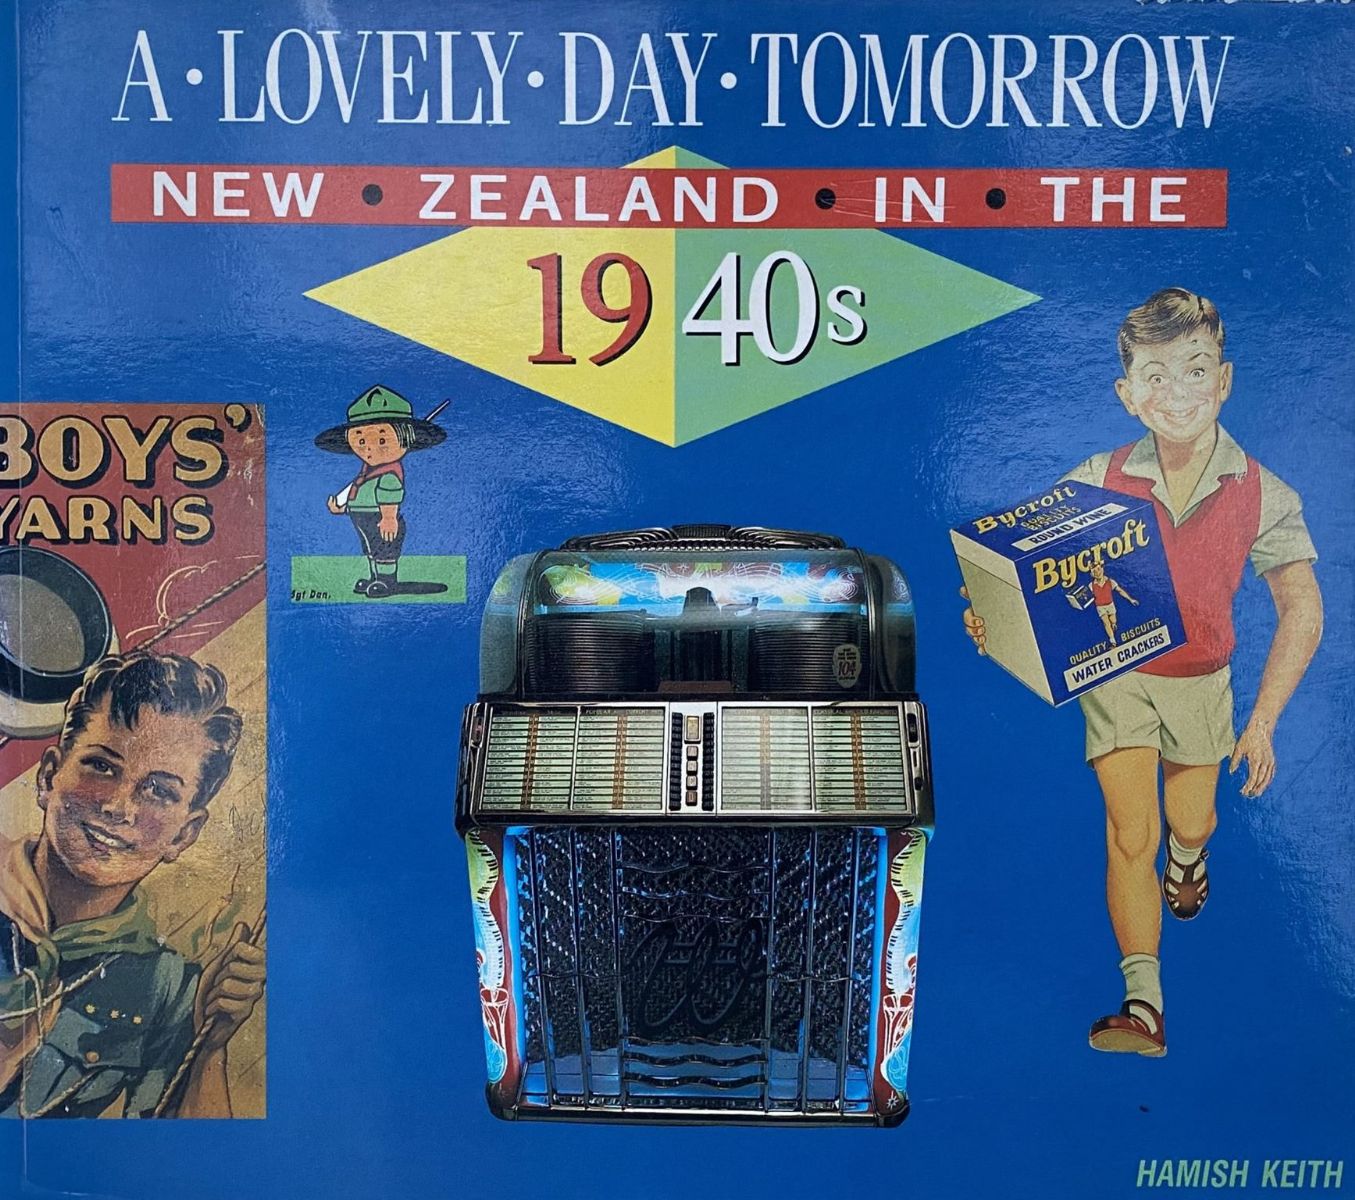 A LOVELY DAY TOMORROW: New Zealand in the 1940s